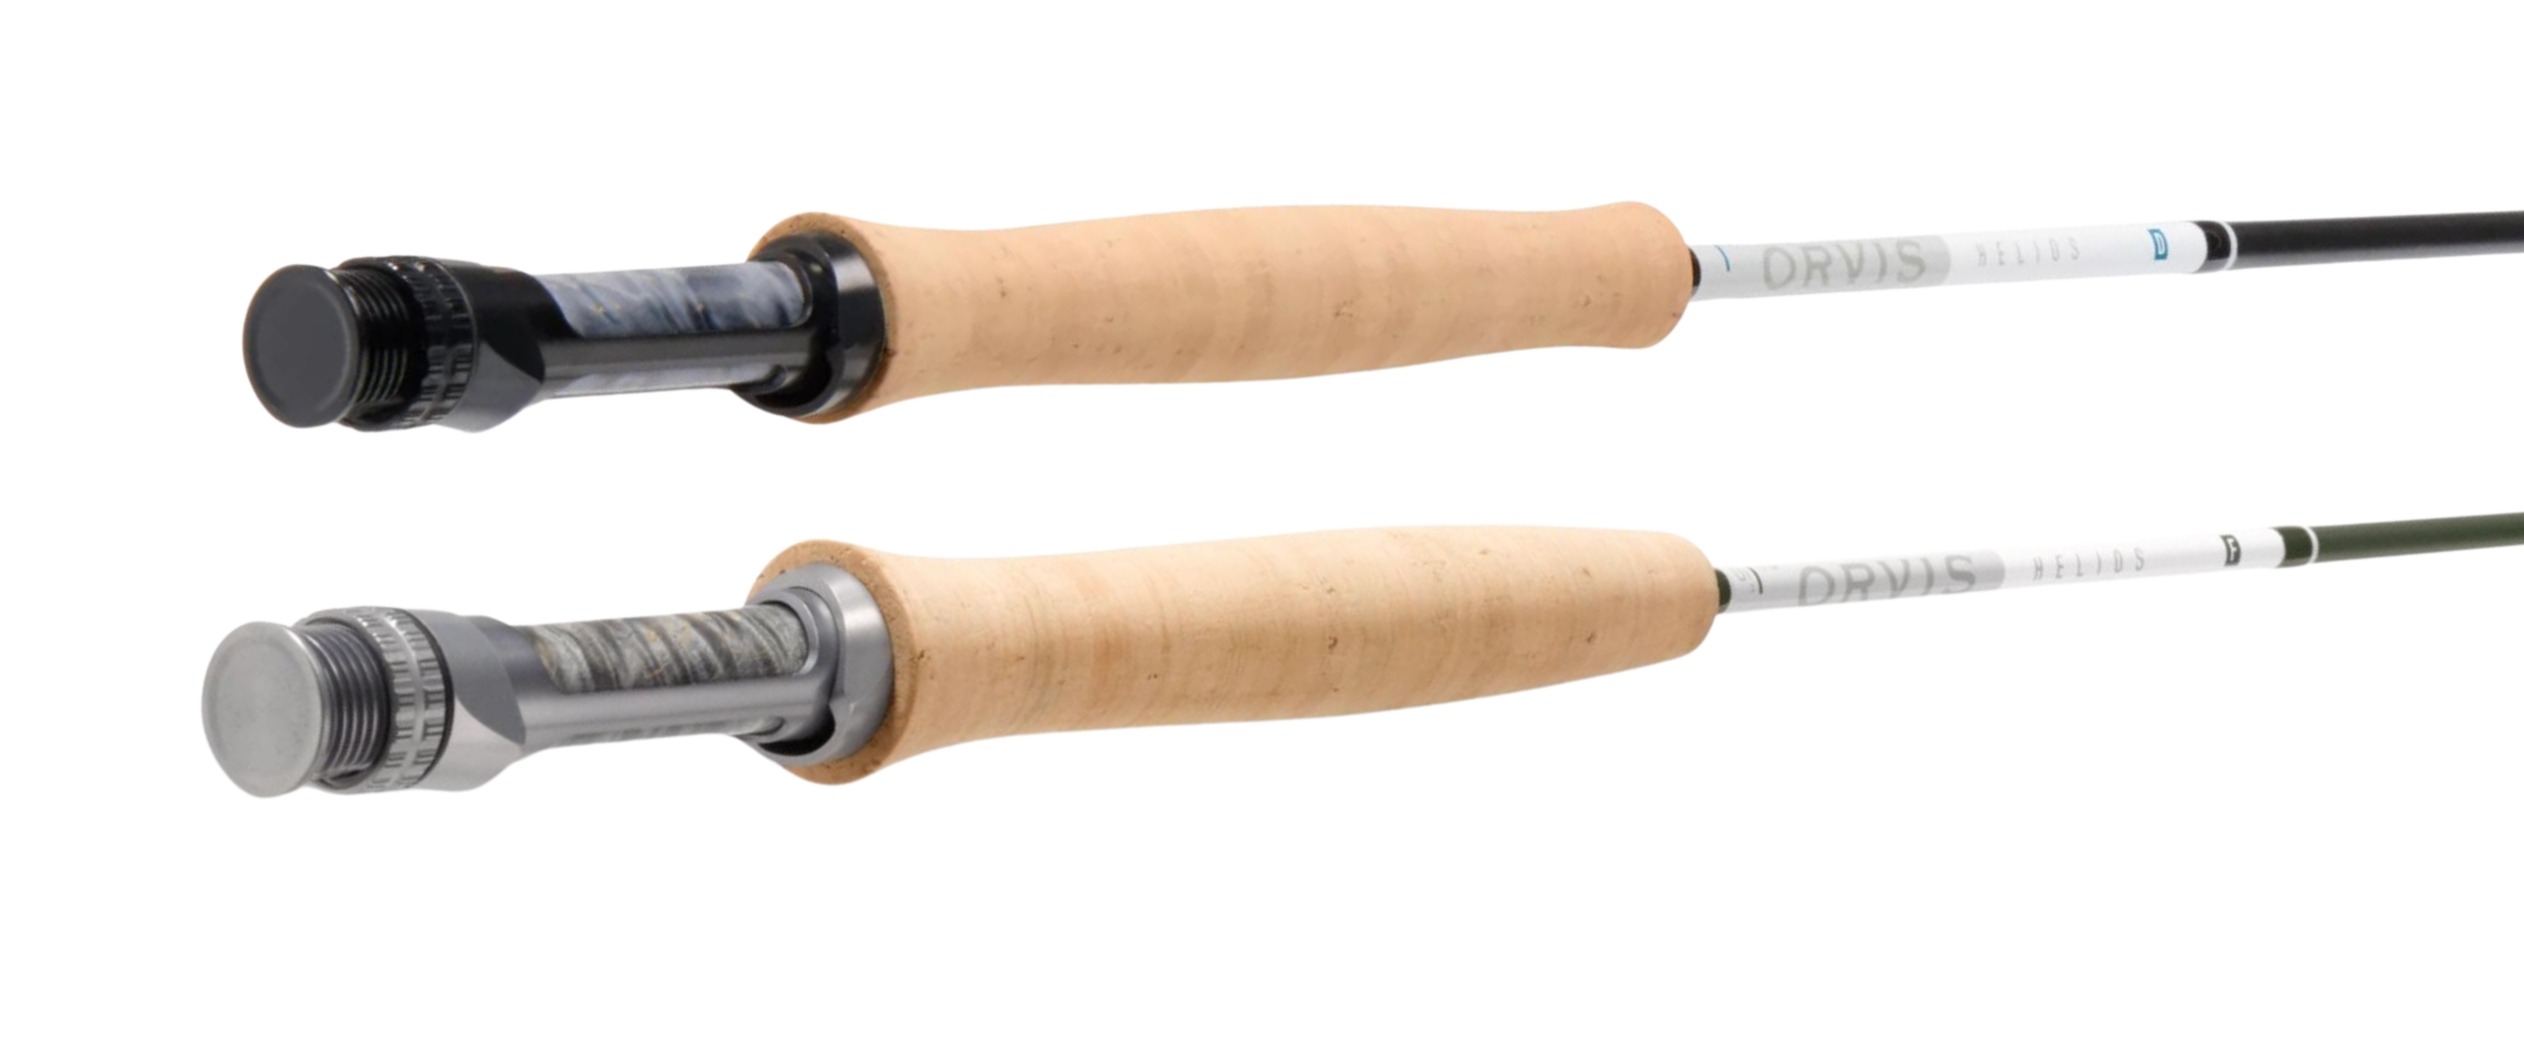 Century Fishing Rods for Sale: Surf Rods, Fly Rods & More